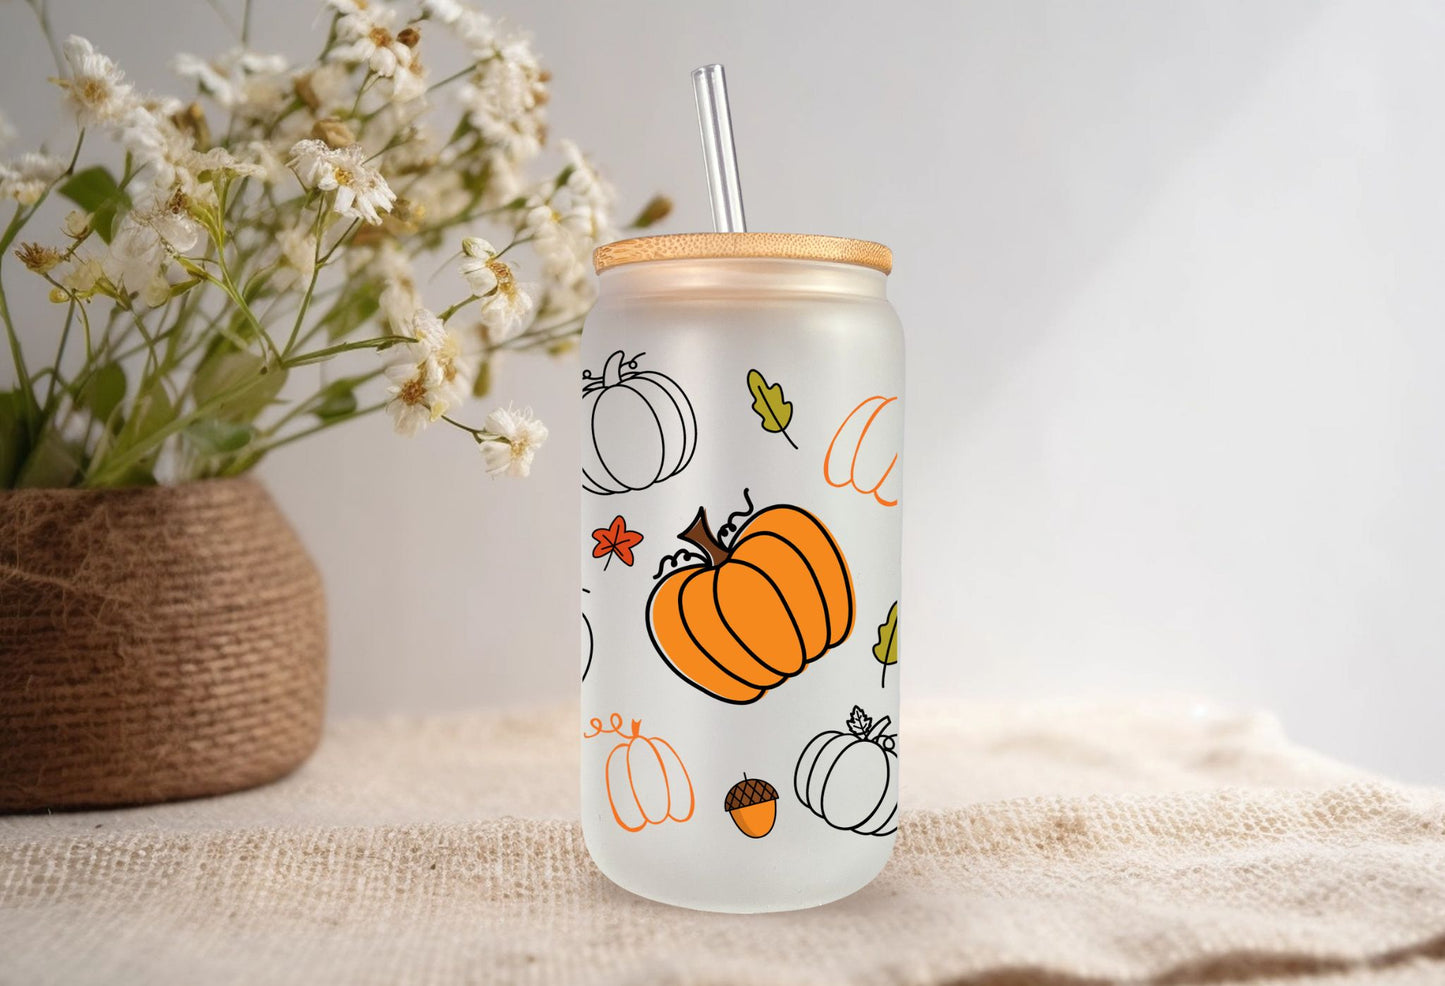 Enjoy your Favorite Pumpkin Spice Drink in Our "Pumpkin" design 16 oz frosted beer can Glass l Libbey Style l Bamboo Lid and Straw included